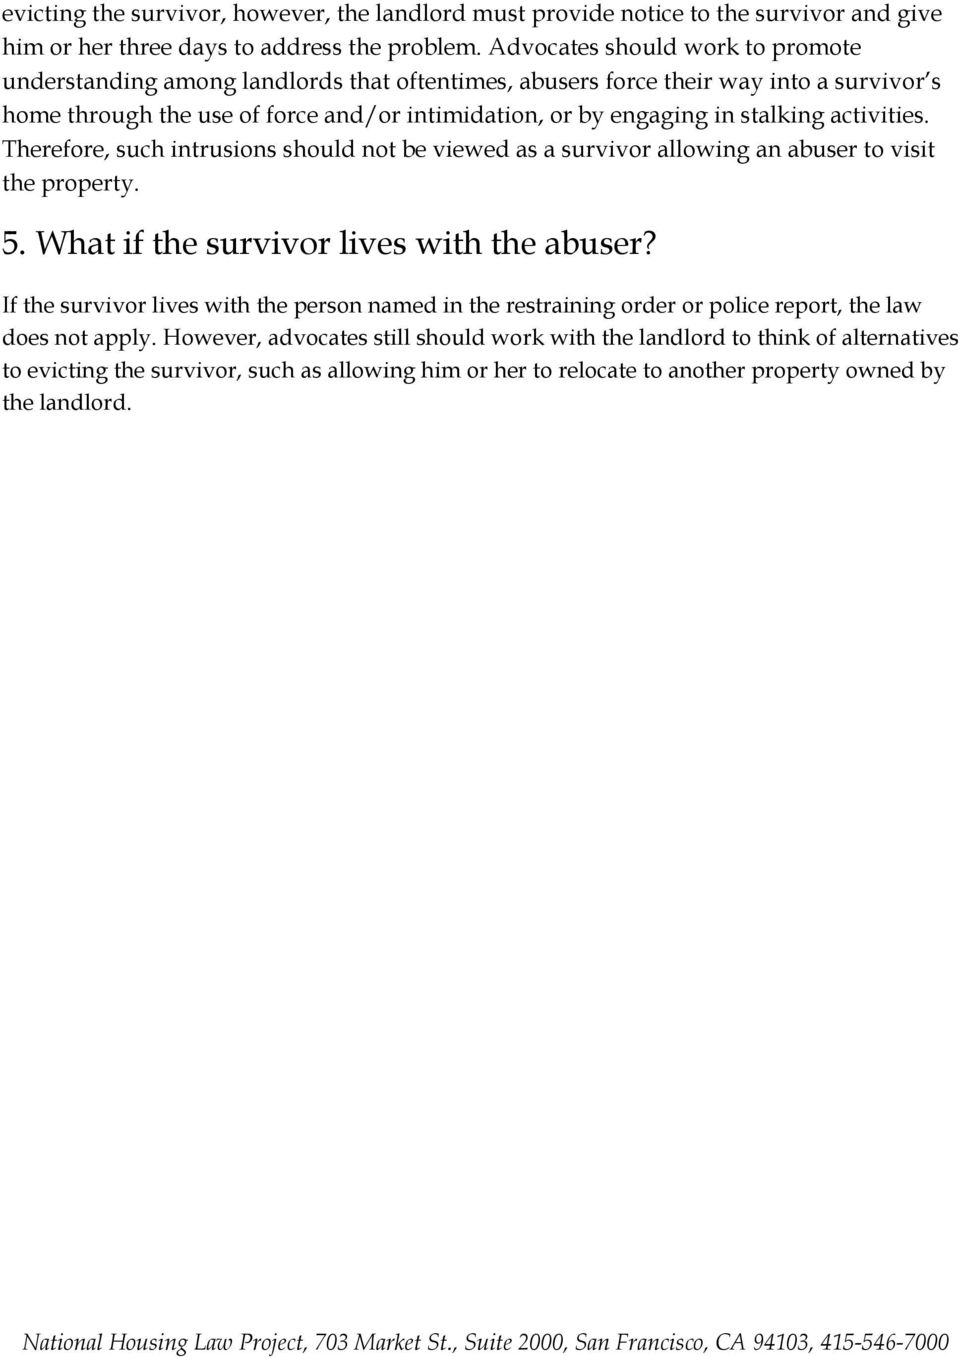 activities. Therefore, such intrusions should not be viewed as a survivor allowing an abuser to visit the property. 5. What if the survivor lives with the abuser?